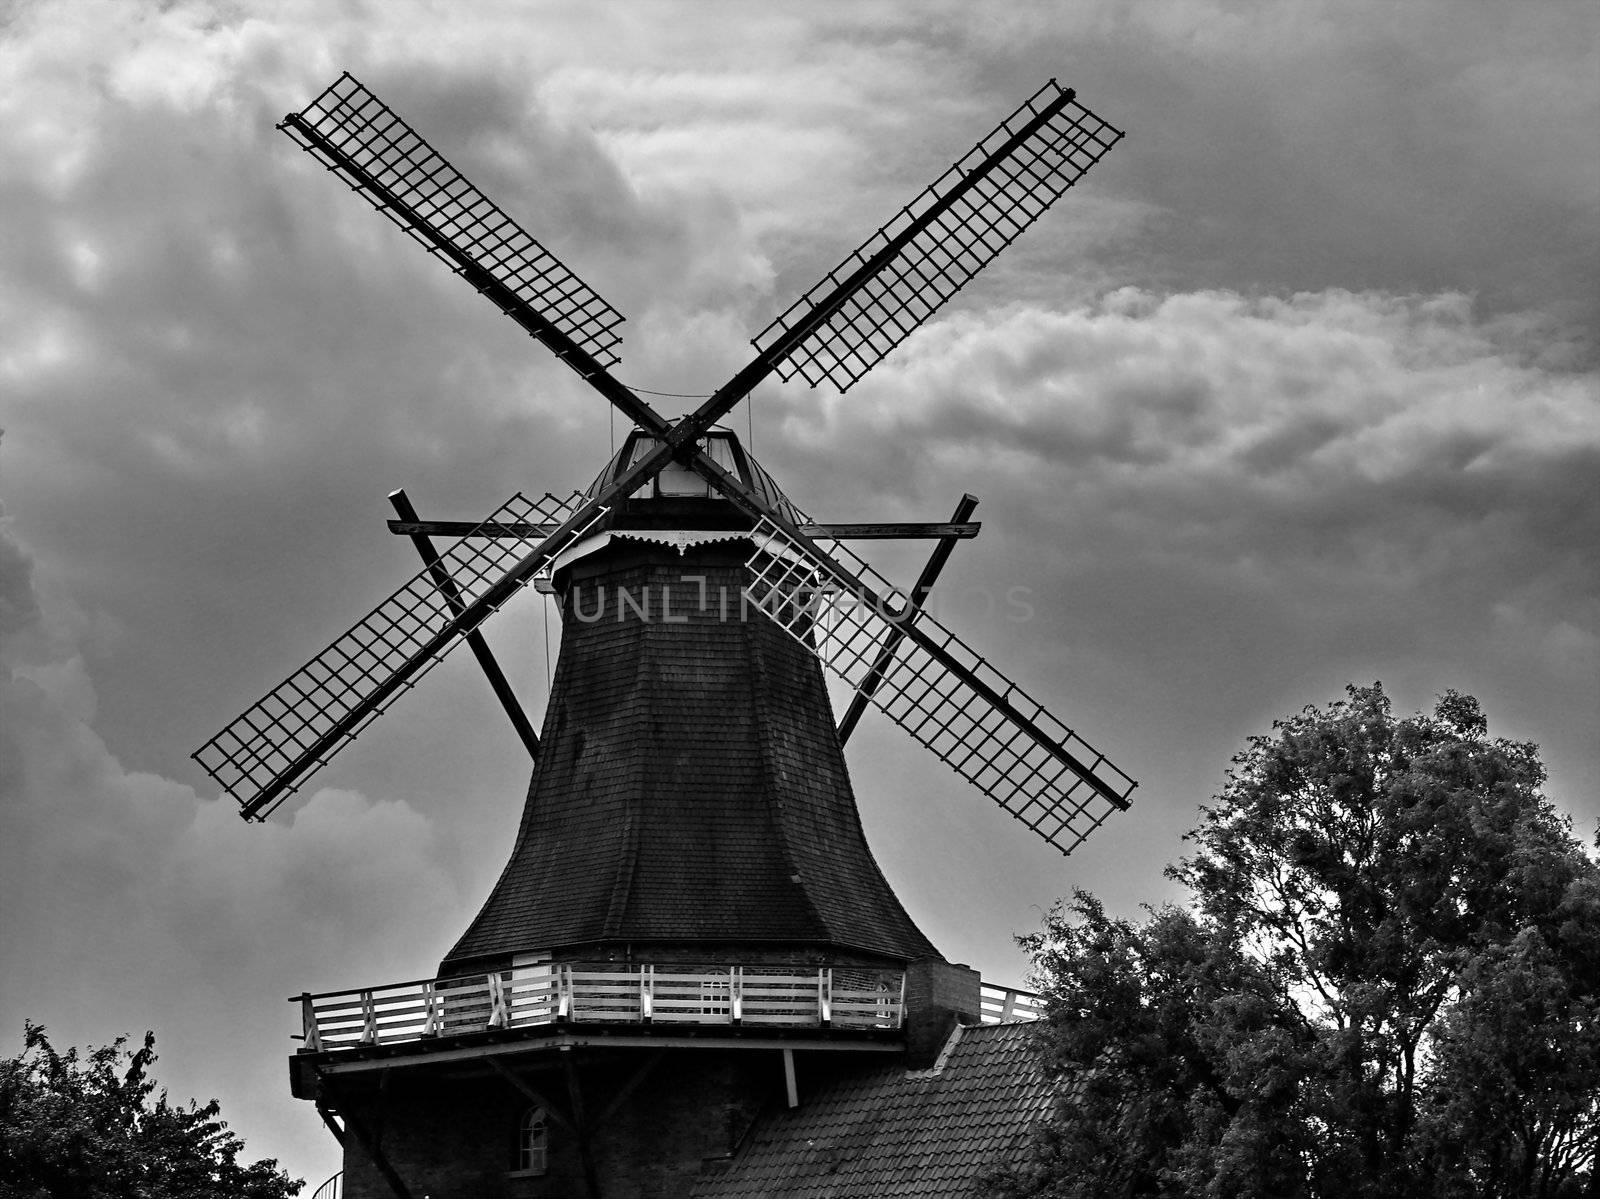 Old Windmill in black and white